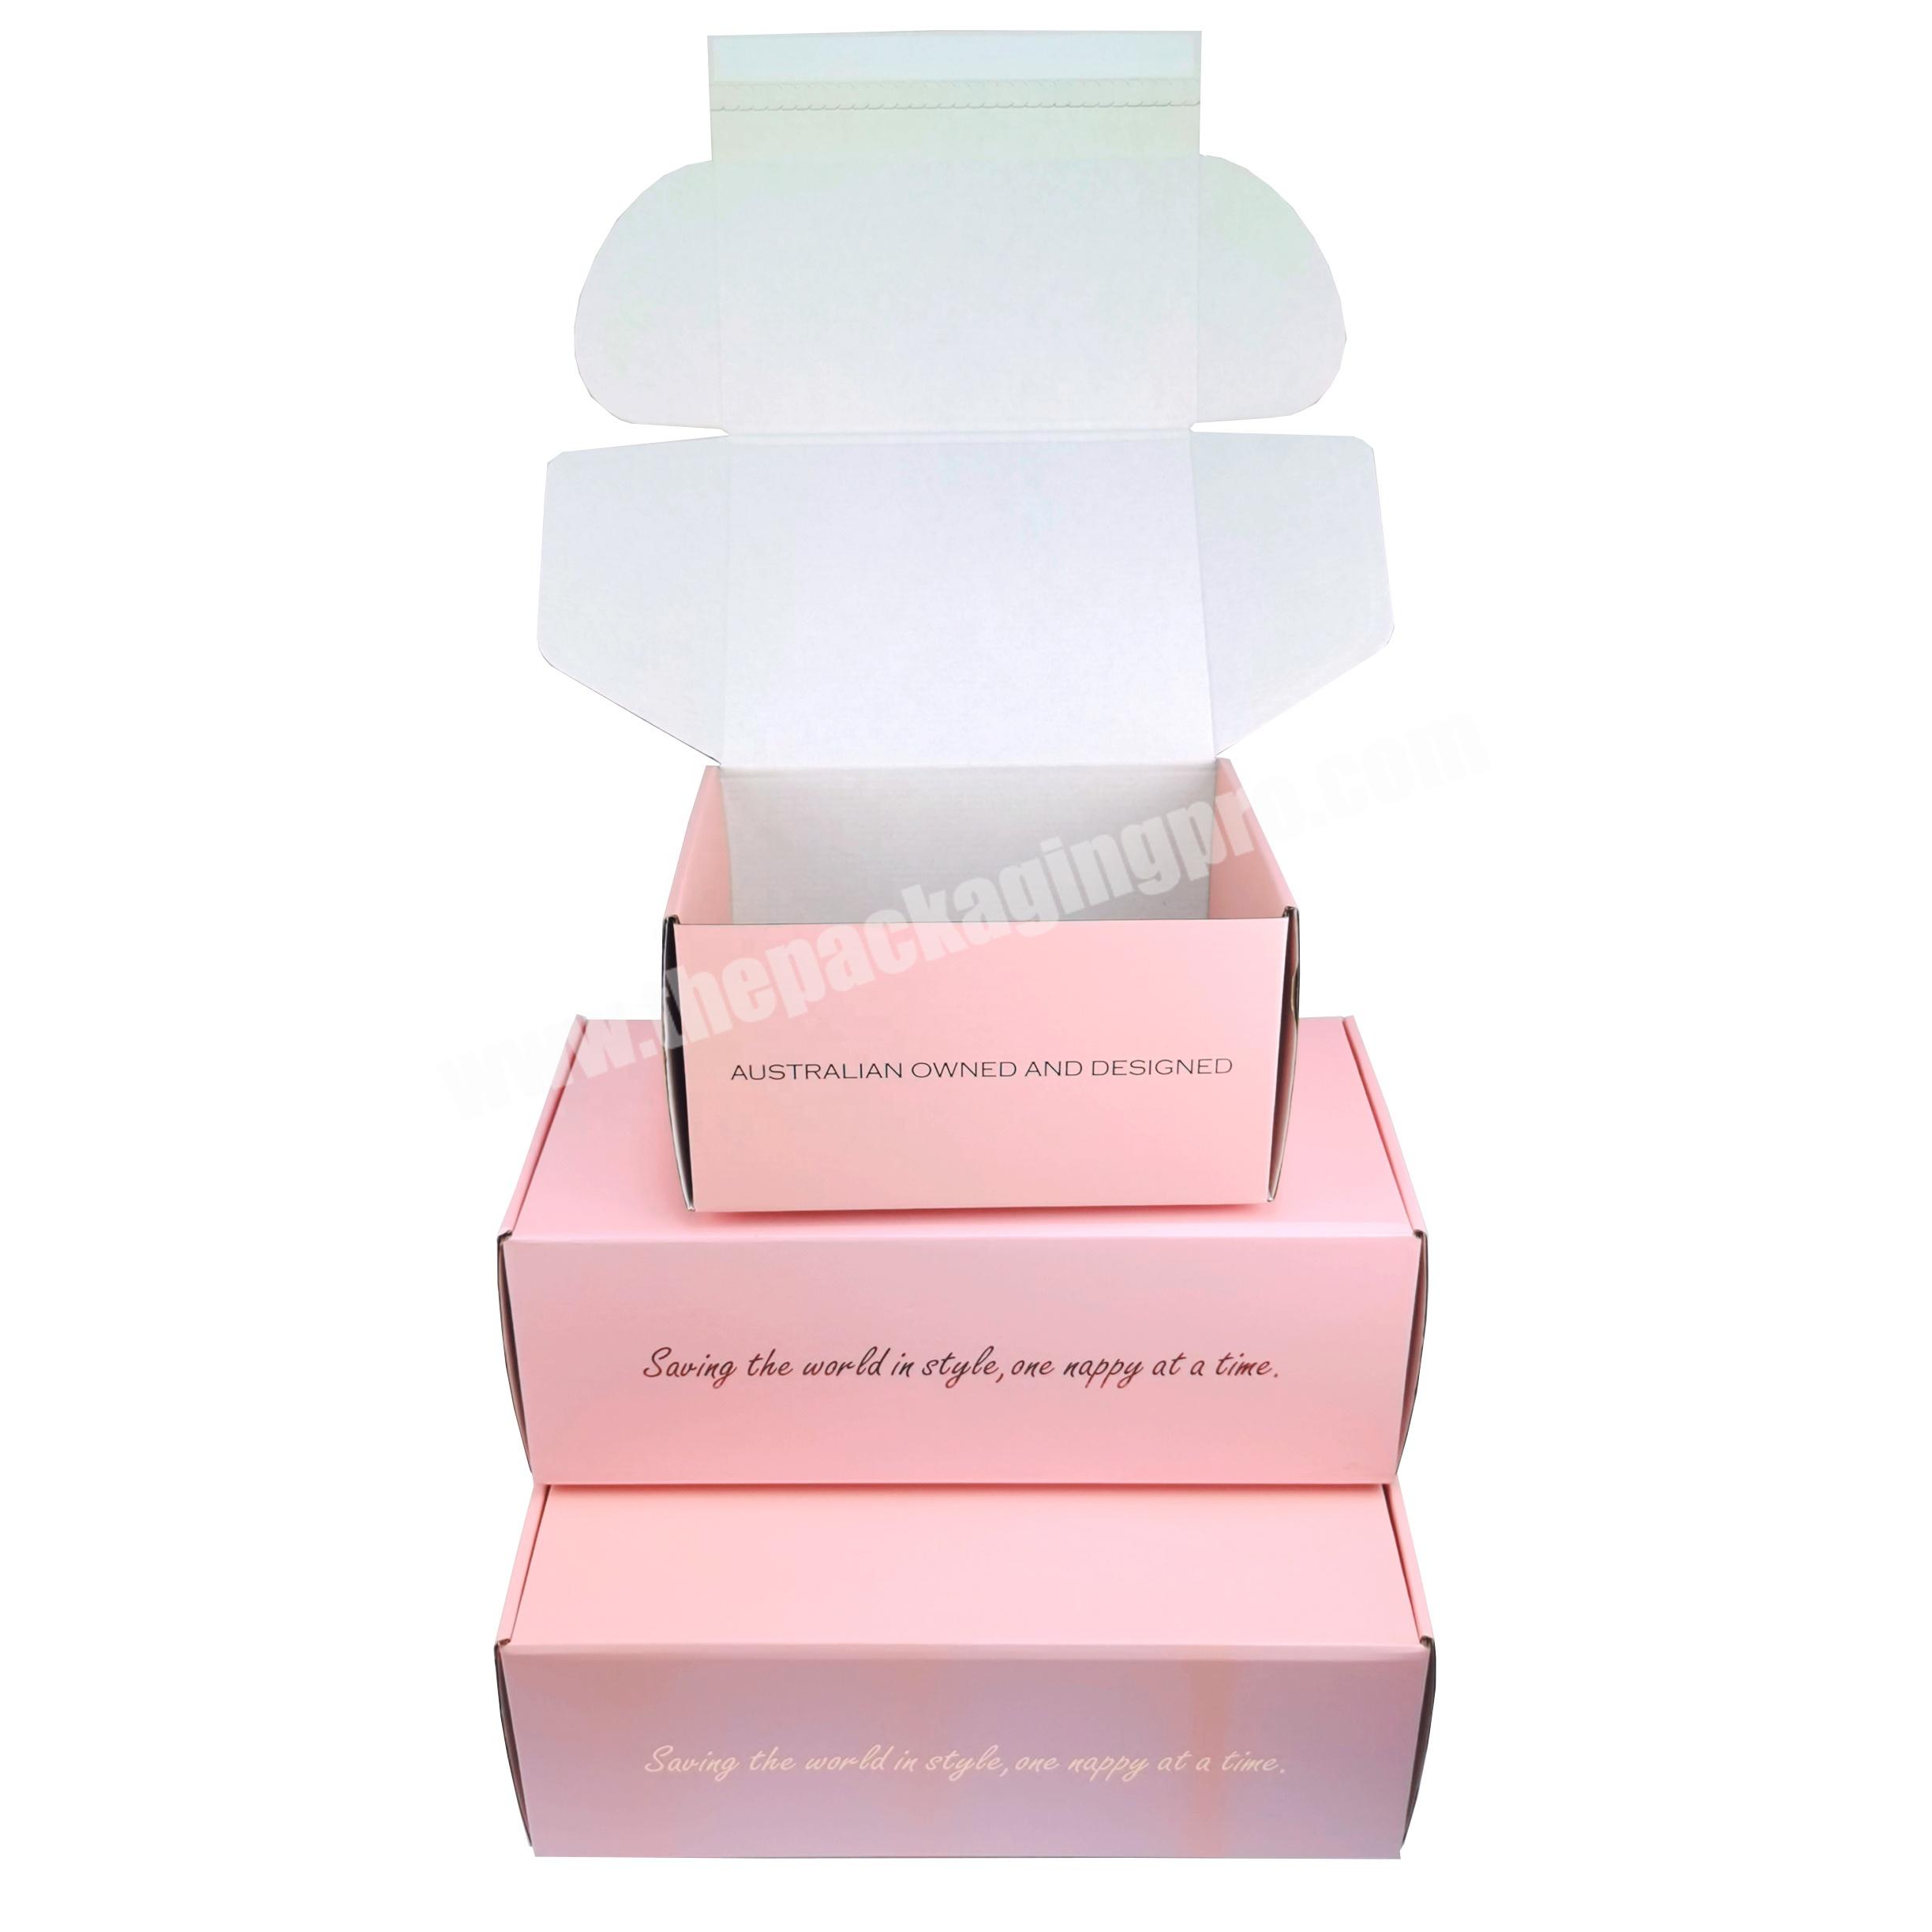 Luxury Skin Care Products Mailing Box With Gold Foil Logo